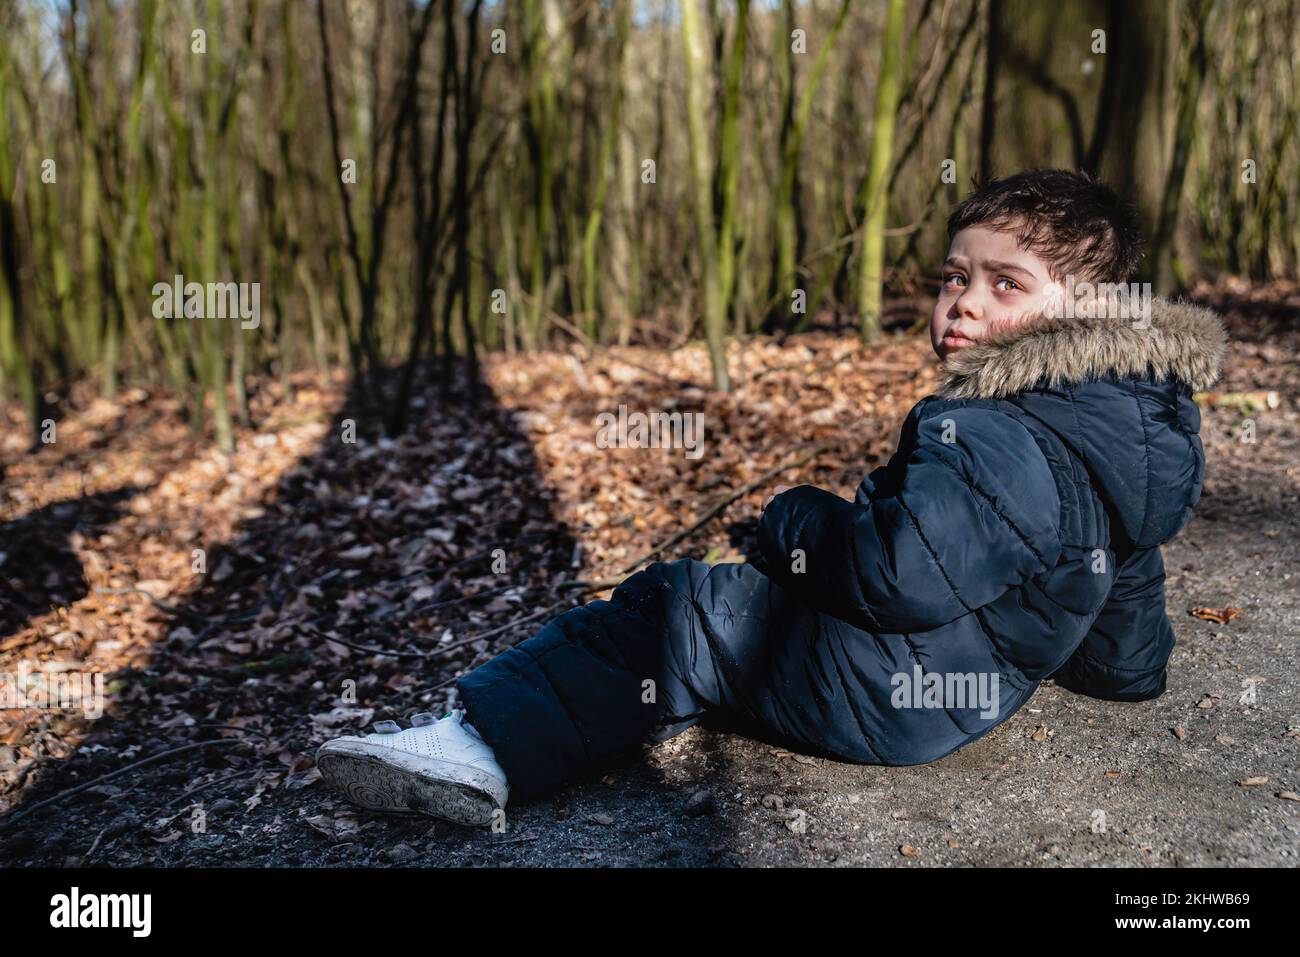 Kid with snowsuit lying on the ground in the woods. Serious child dressing snow suit is relaxing on the forest 's floor with face lit by the sunlight Stock Photo